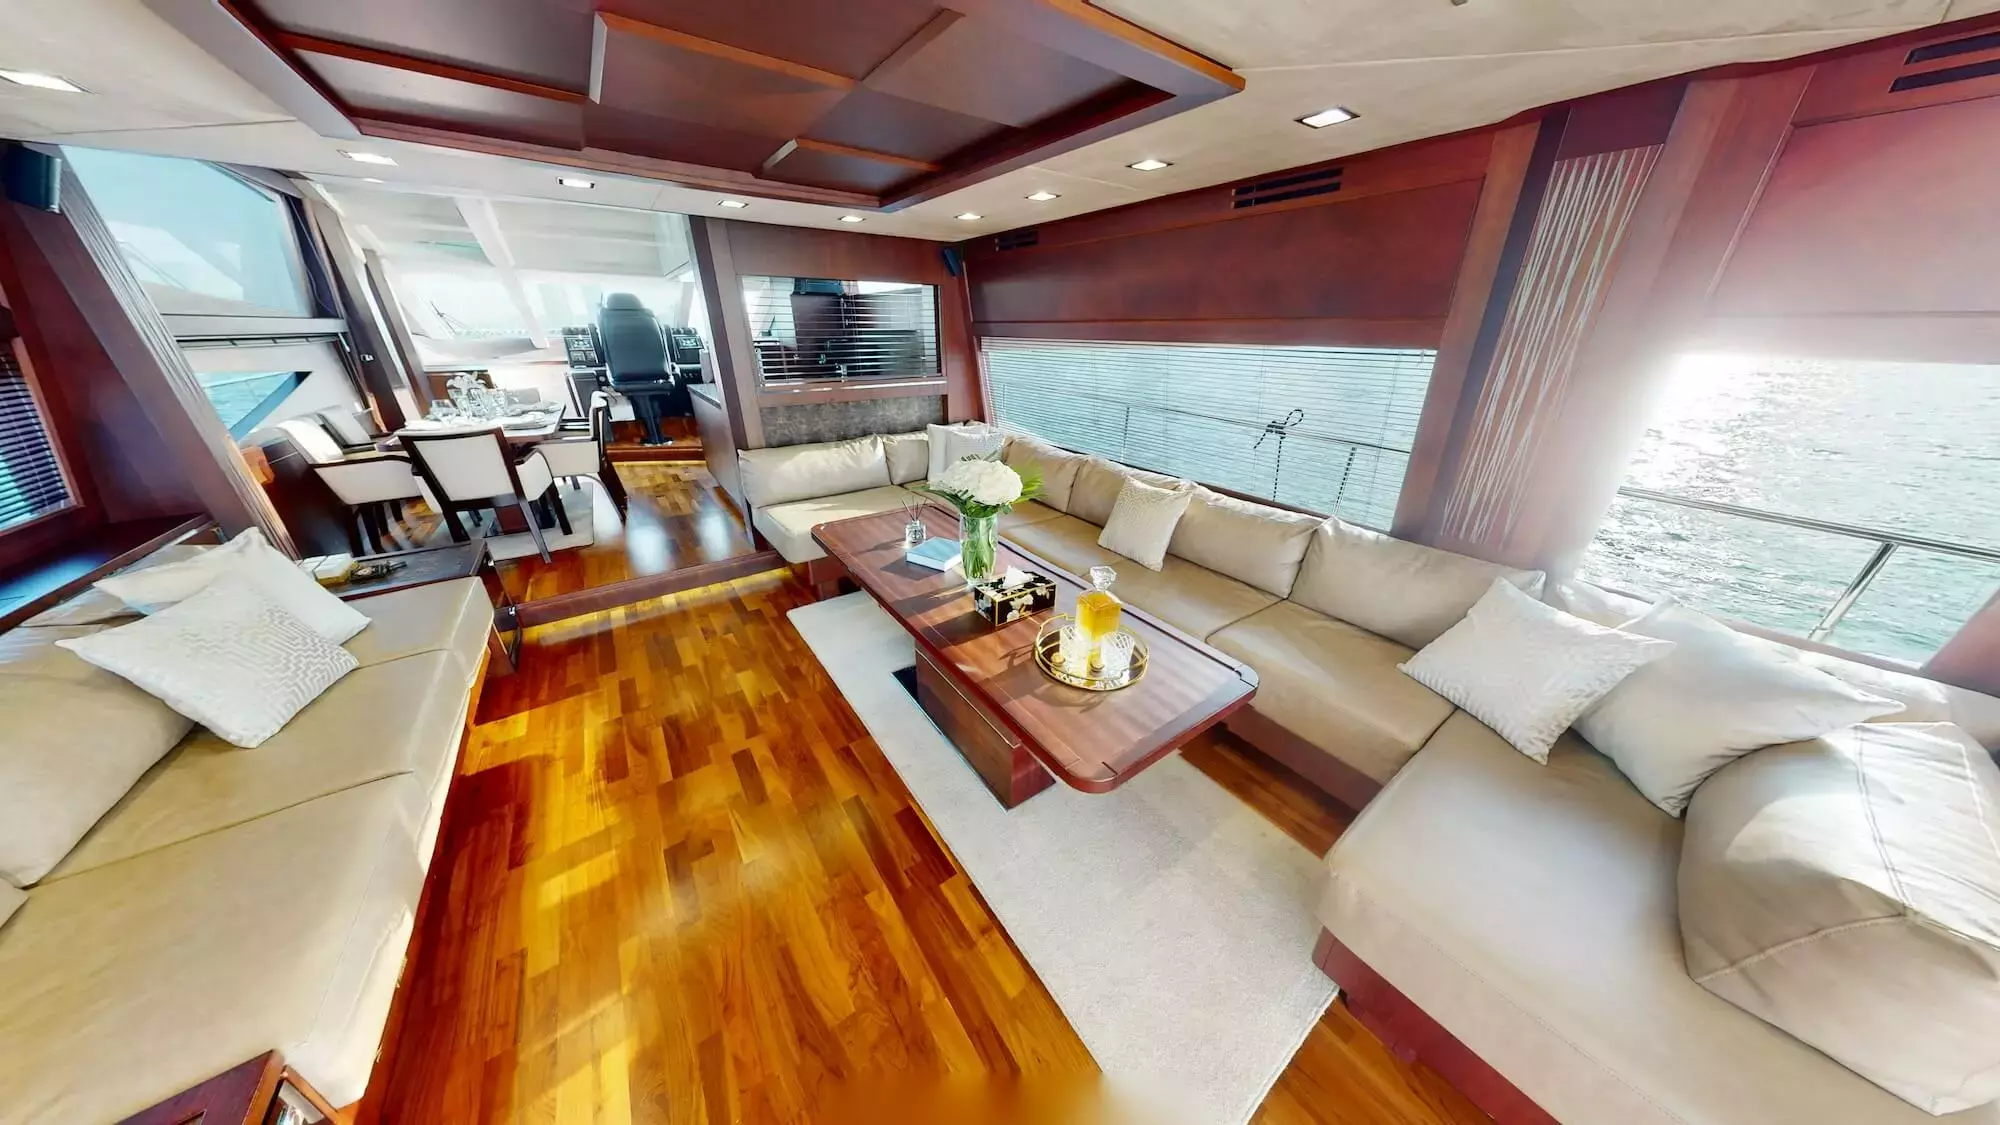 French by Galeon - Special Offer for a private Motor Yacht Charter in Dubai with a crew